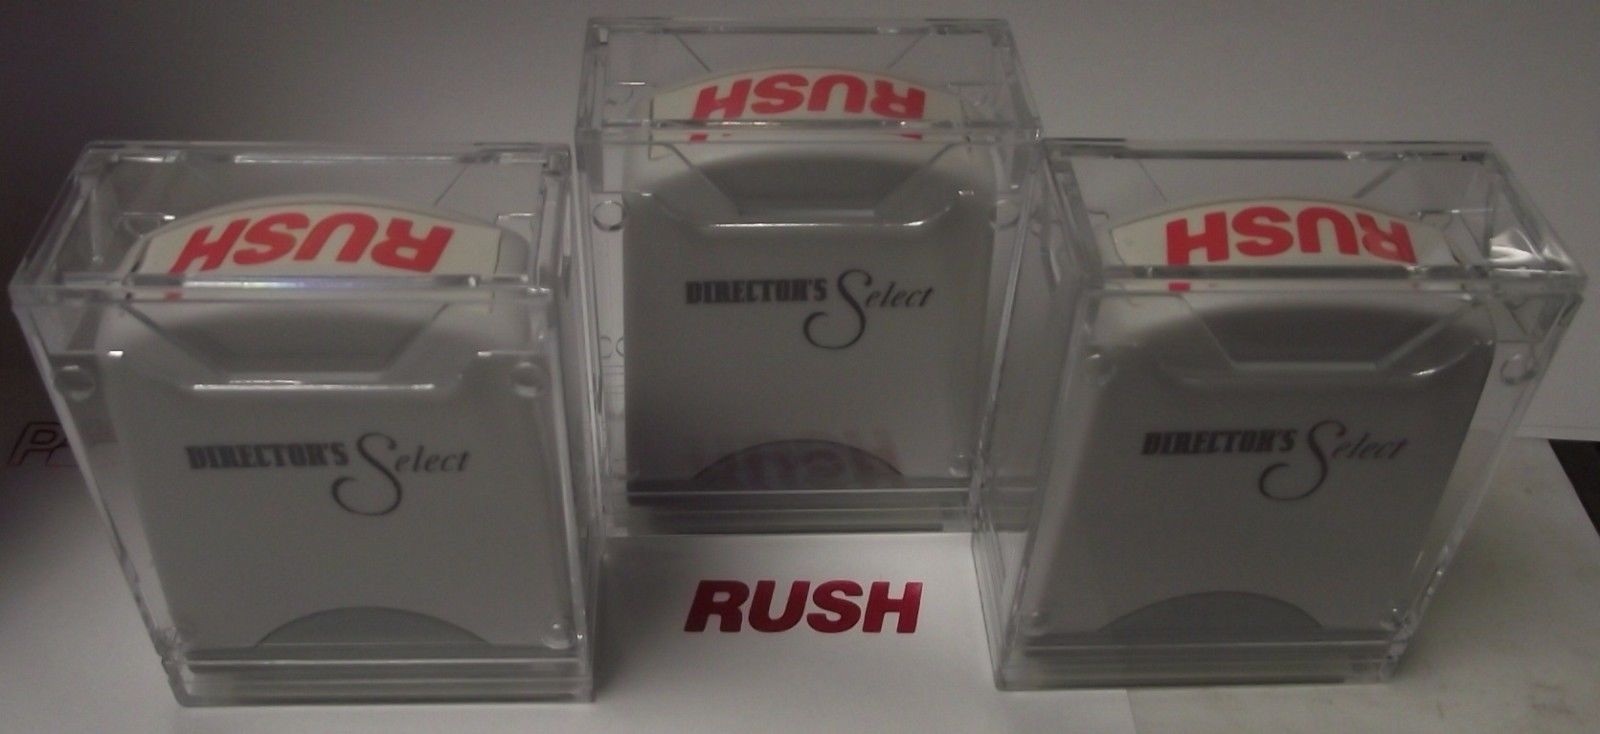 Global AGI-SS02005 Rectangle Stock Pre-Inked Rubber Stamp With "Rush" 3pcs.